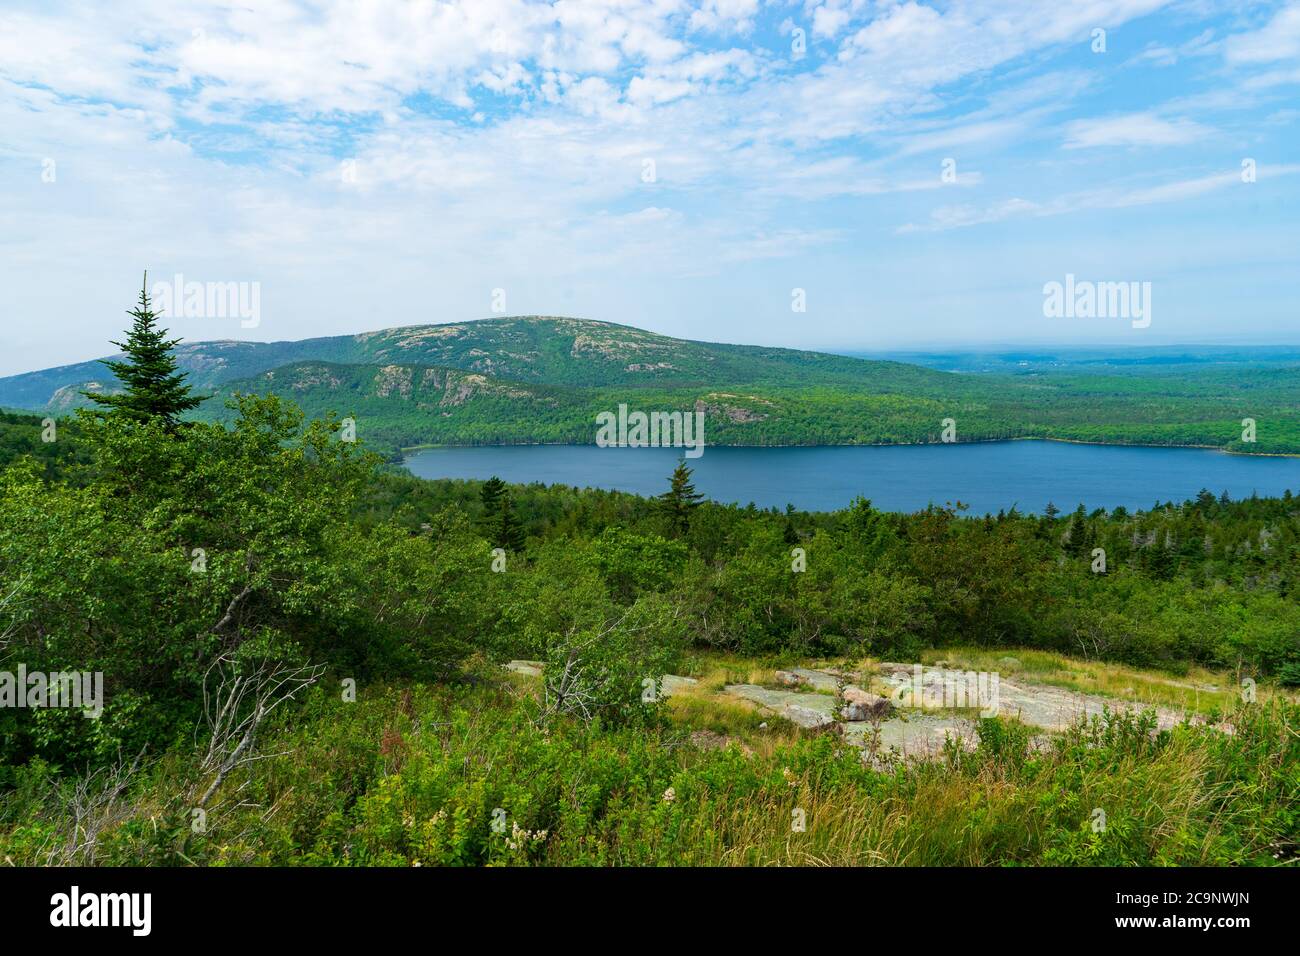 Acadia National Park in Maine. Stock Photo